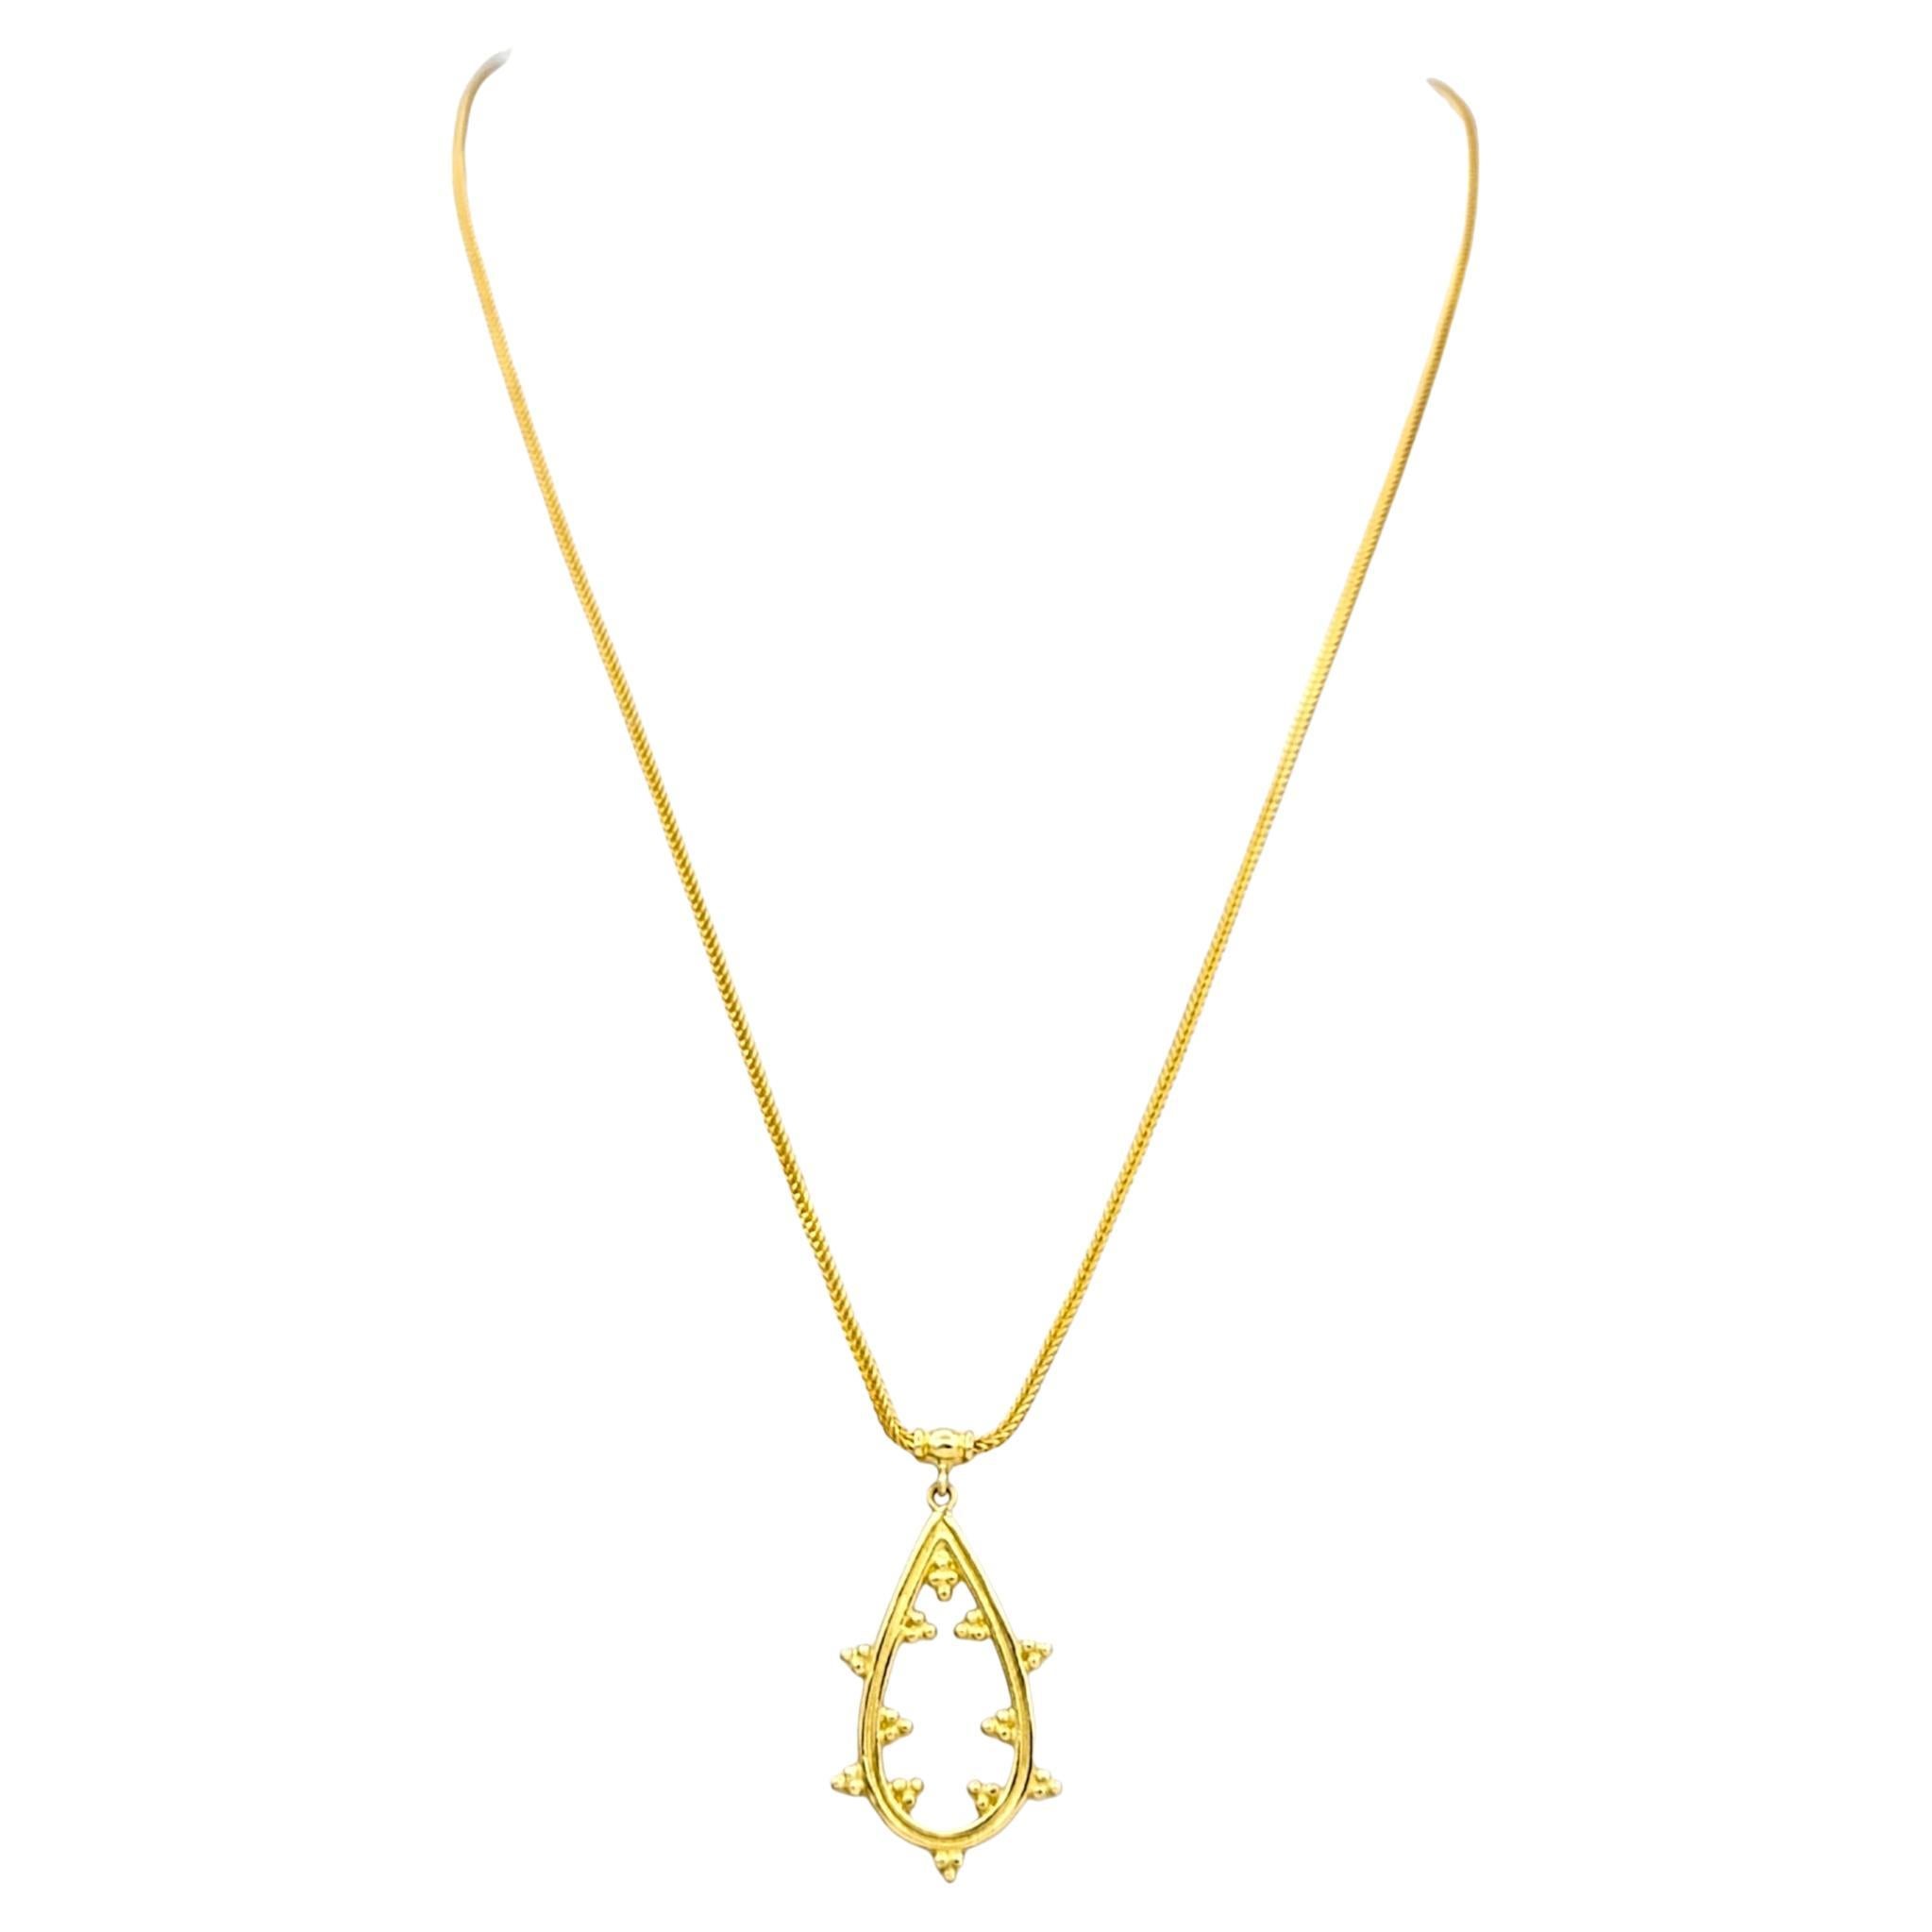 Pear Shaped Open Pendant Necklace with Bead Clusters in 18 Karat Yellow Gold